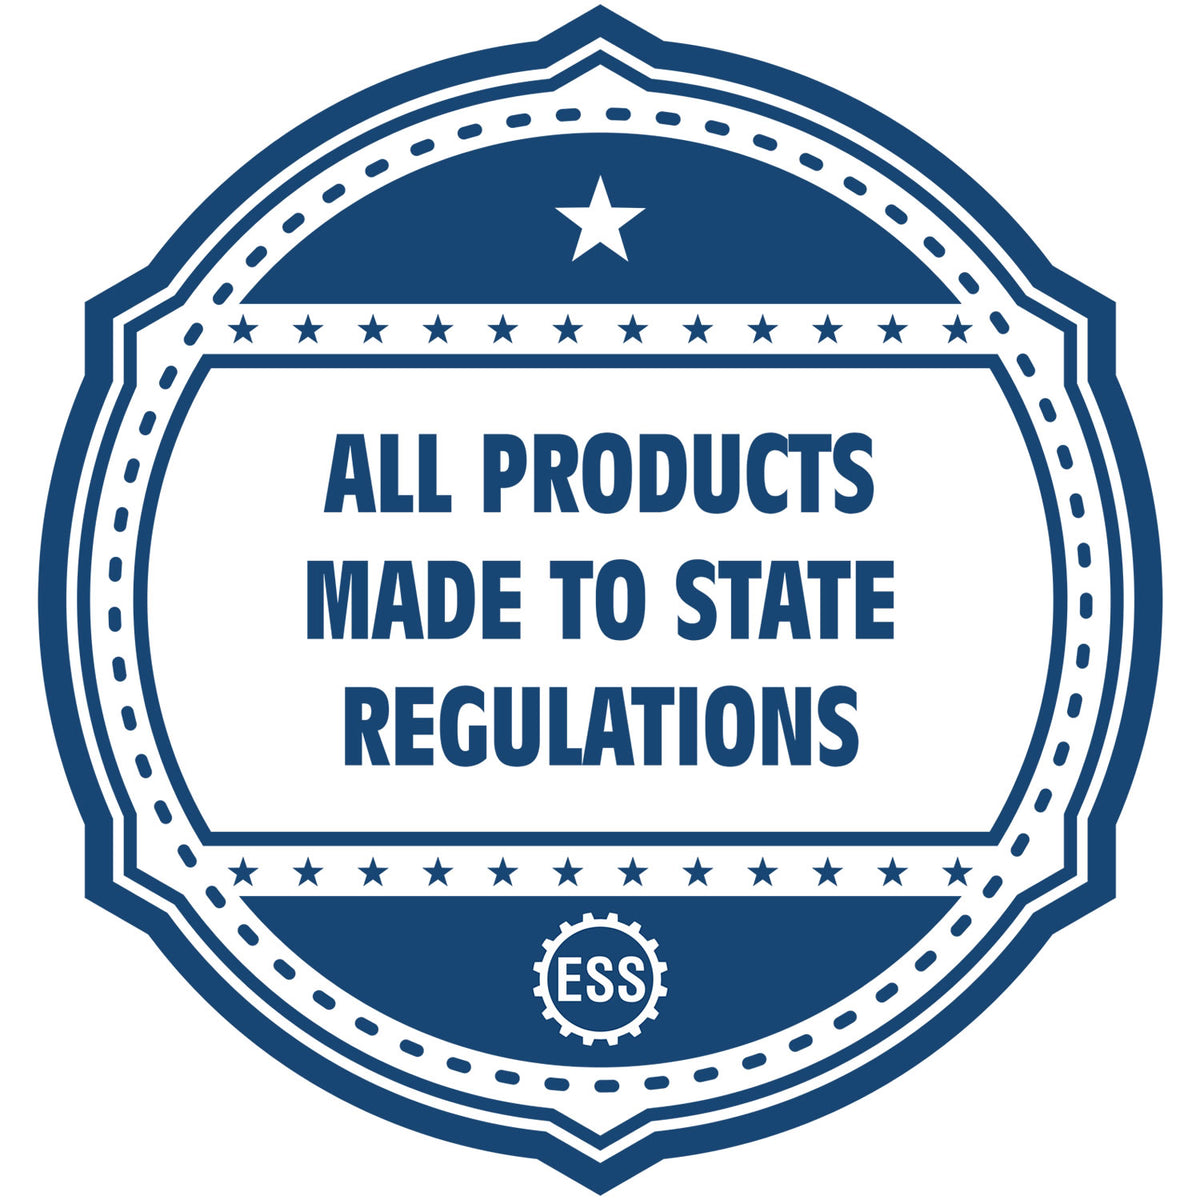 An icon or badge element for the MaxLight Premium Pre-Inked Arkansas Rectangular Notarial Stamp showing that this product is made in compliance with state regulations.